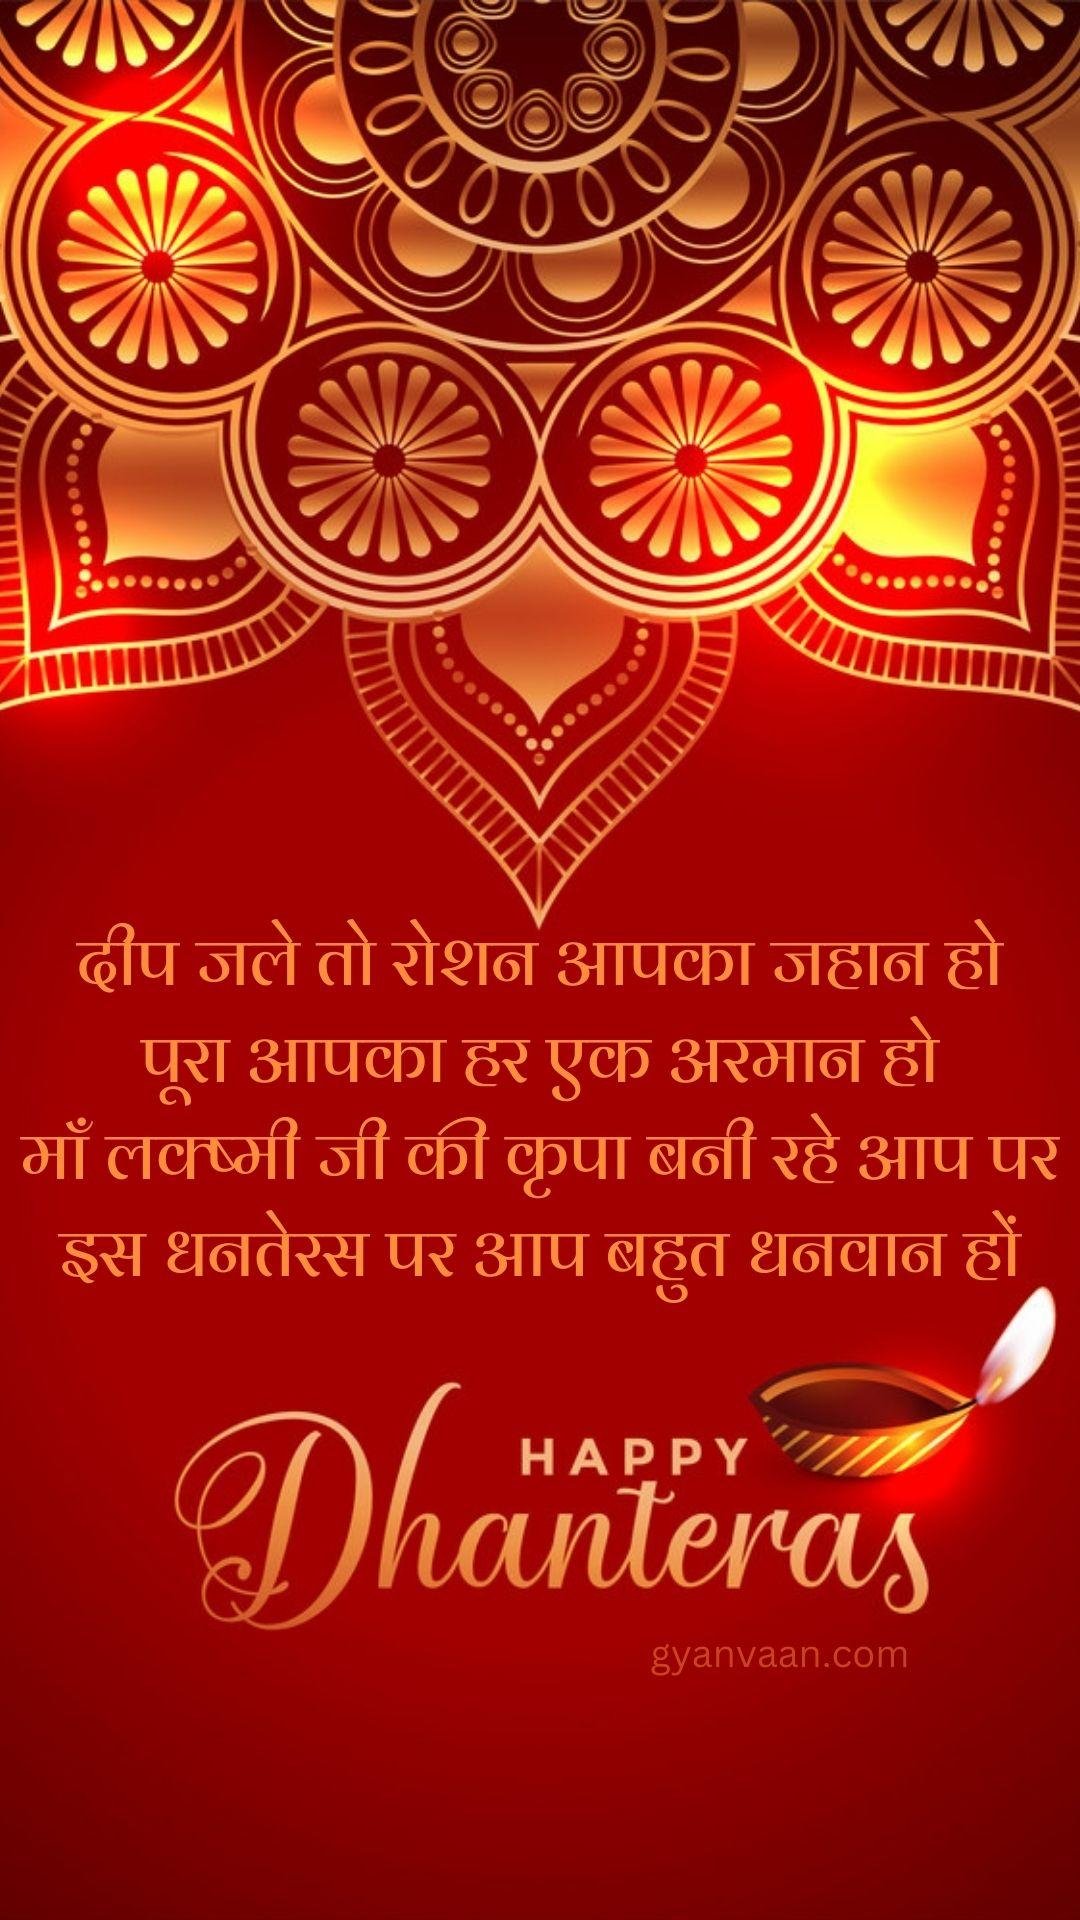 Dhanteras Quotes In Hindi With Status Wishes And Hardik Shubhkamnaye 5 - Dhanteras Quotes In Hindi